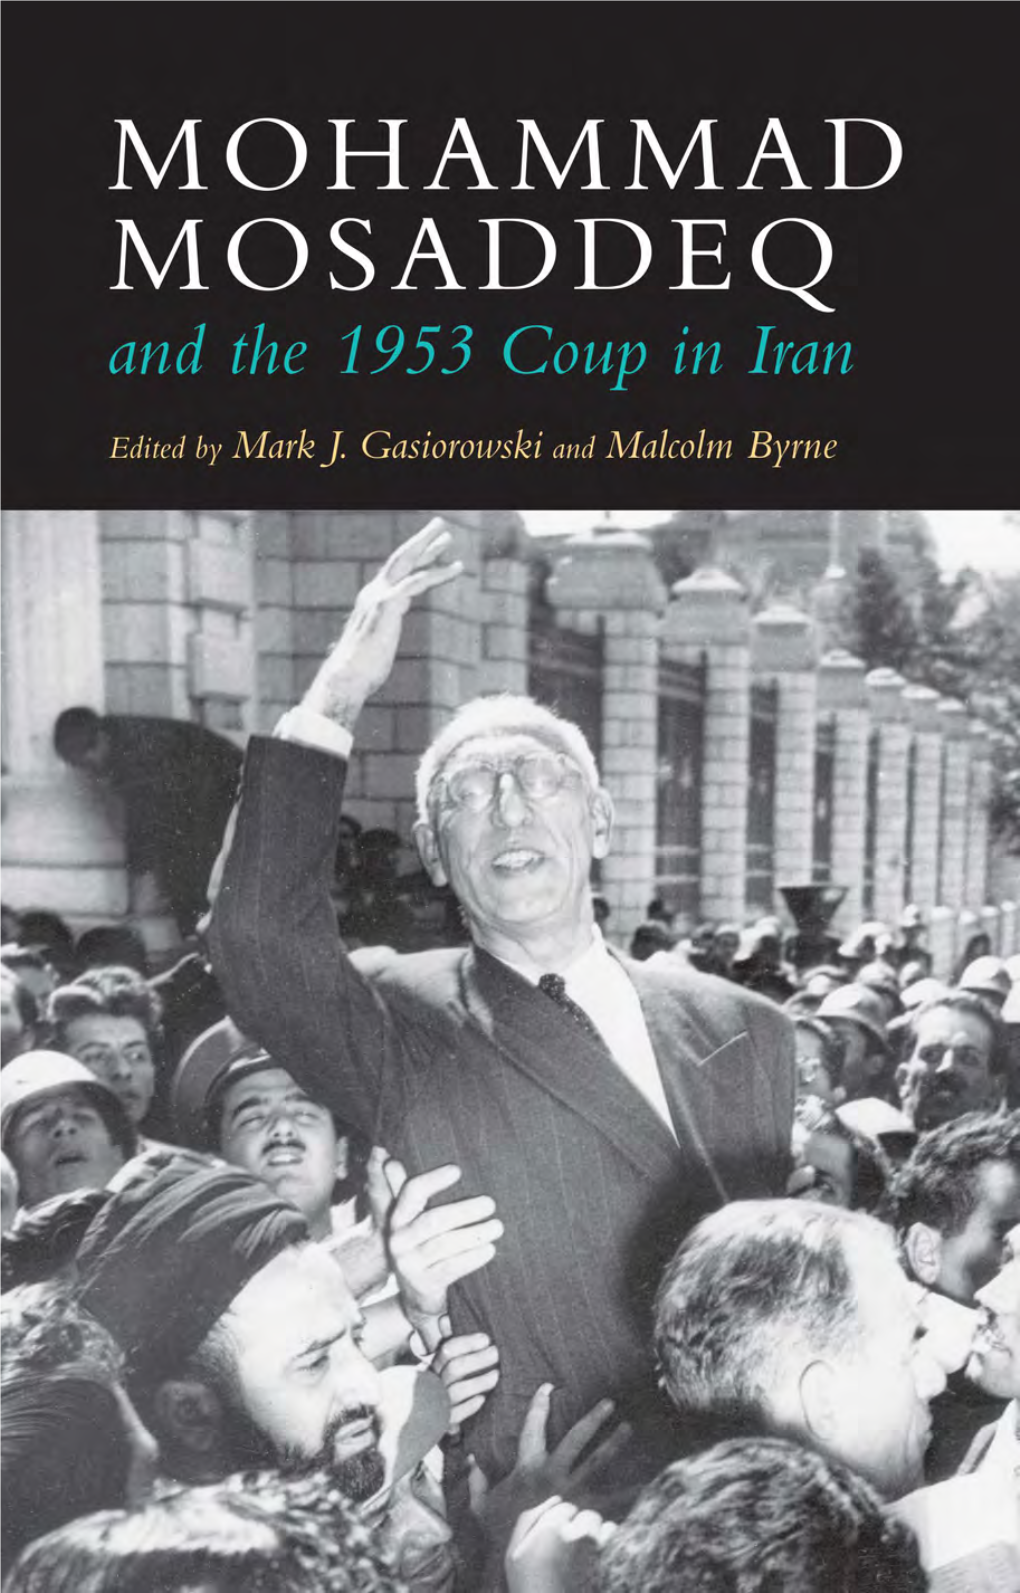 And the 1953 Coup in Iran